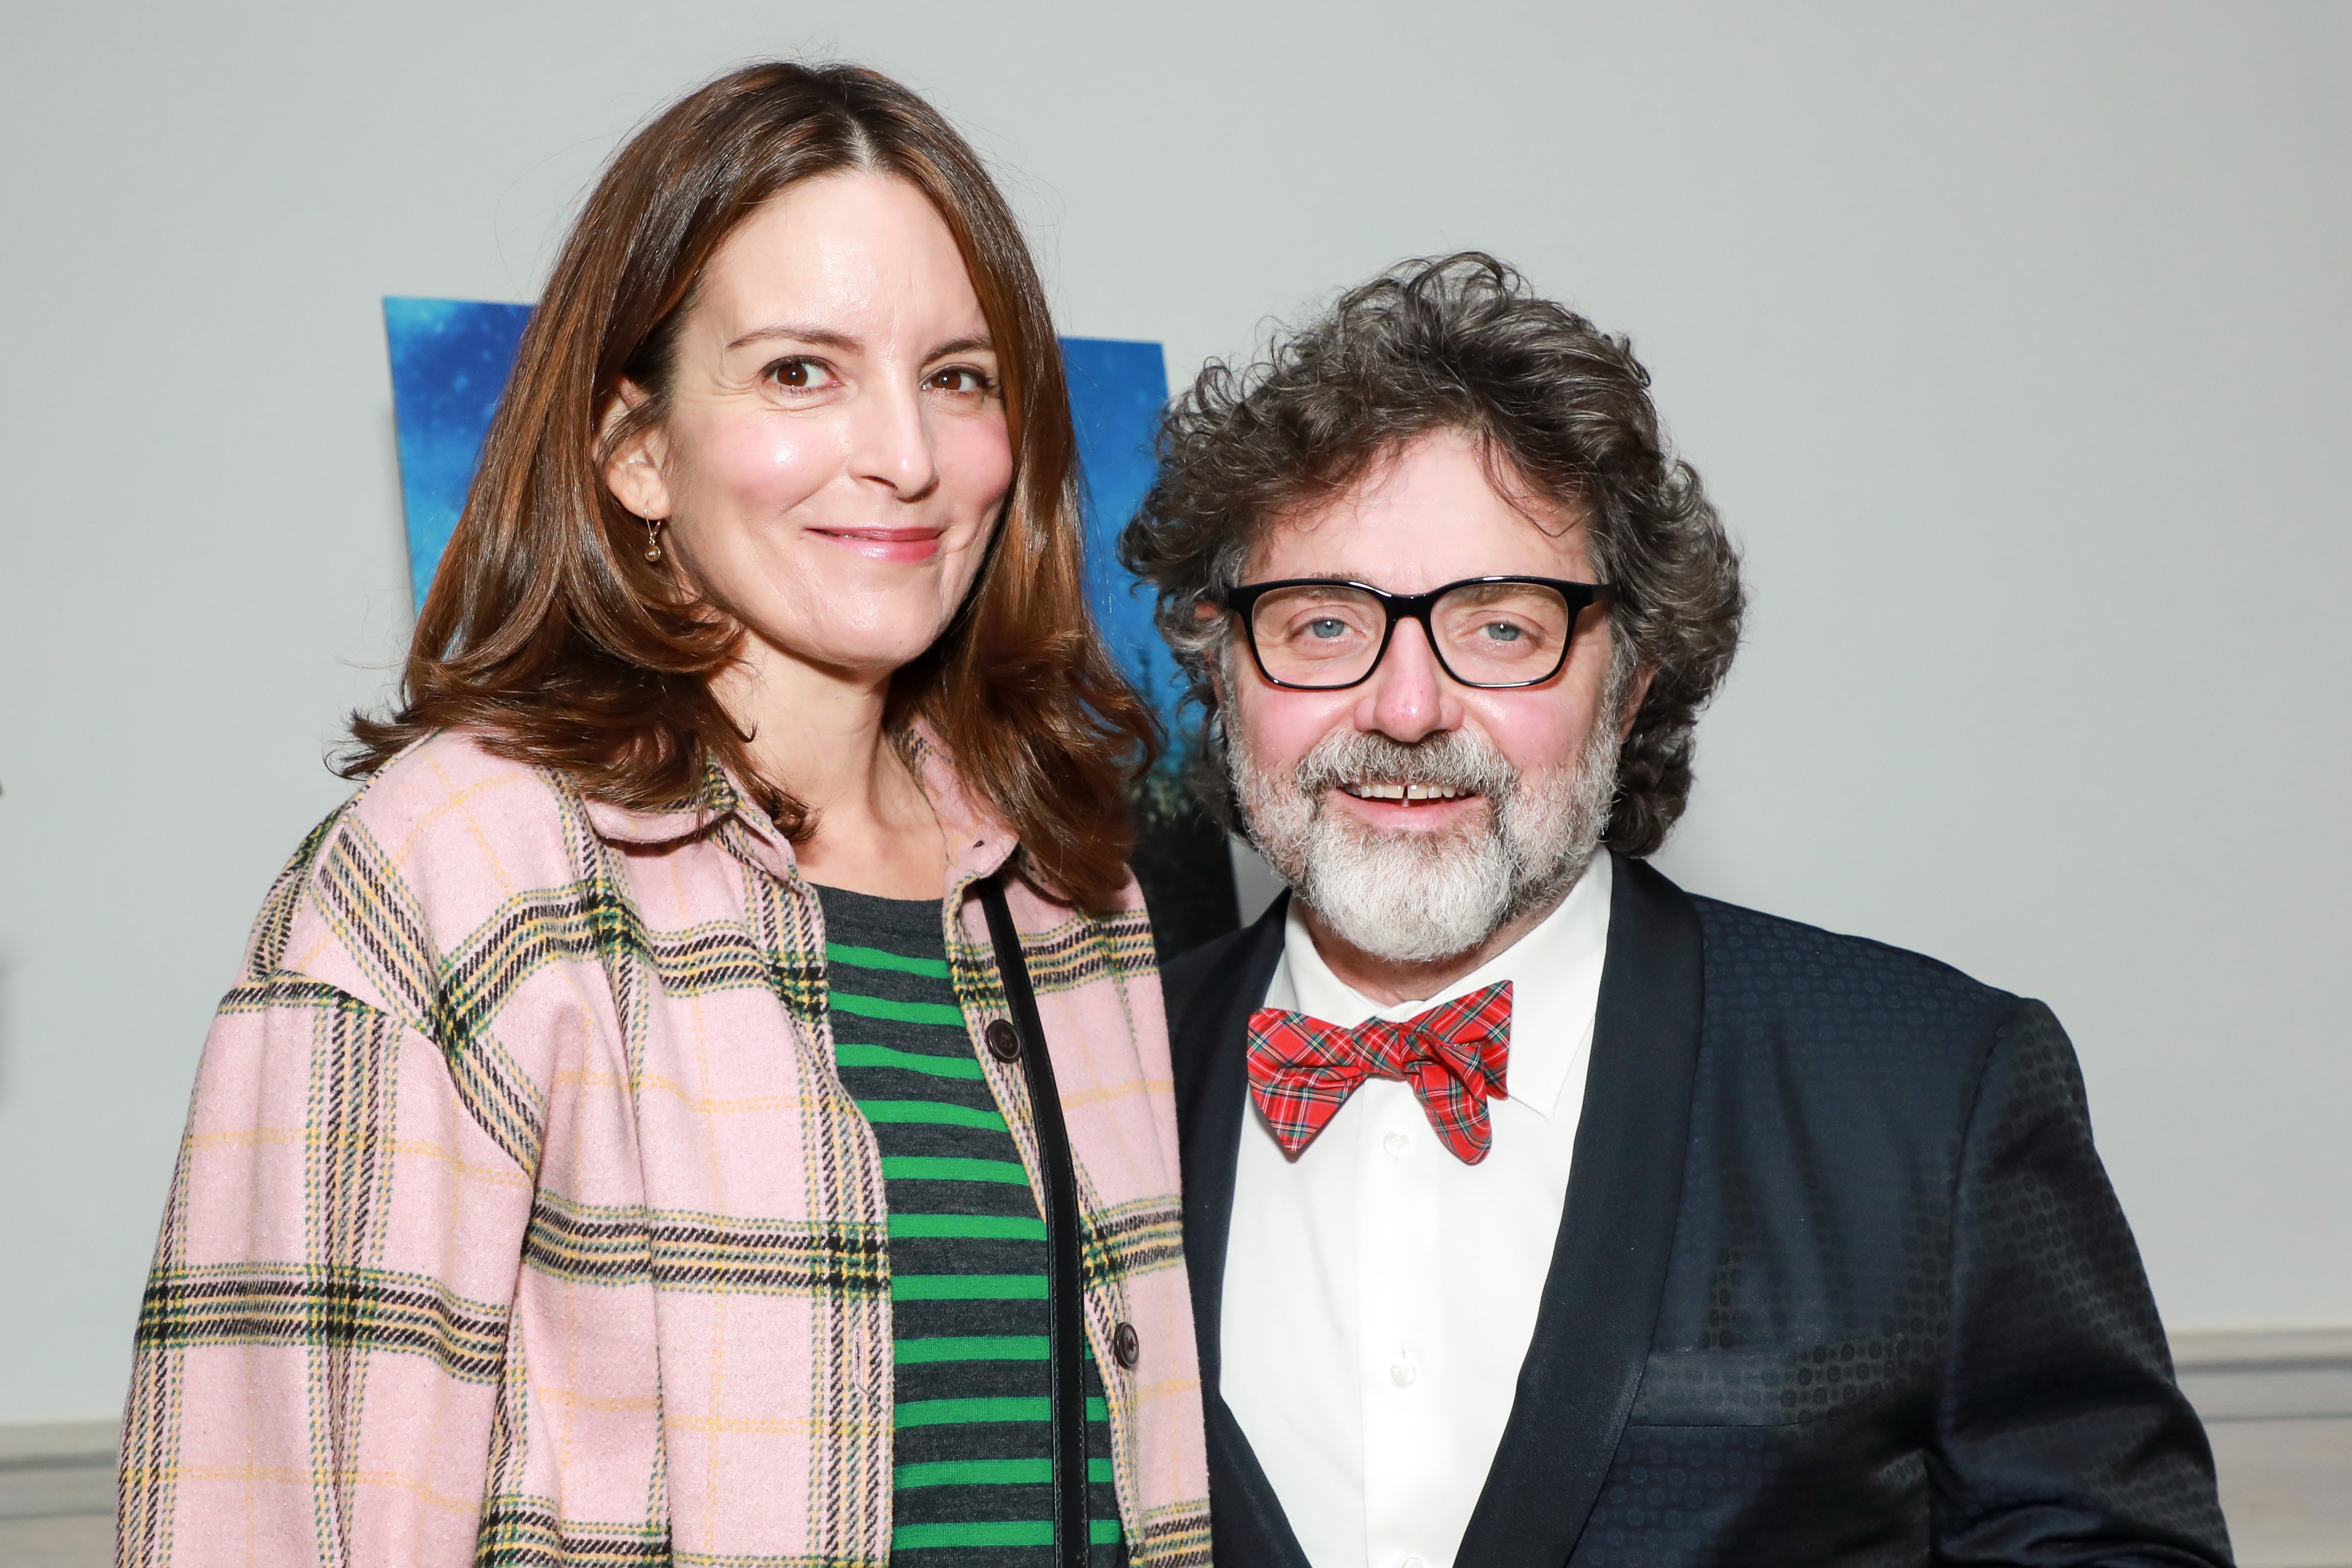 Tina Fey and Jeff Richmond at the New York premiere of Comedy Central's "A Clusterfunke Christmas" on November 21, 2021 | Source: Getty Images